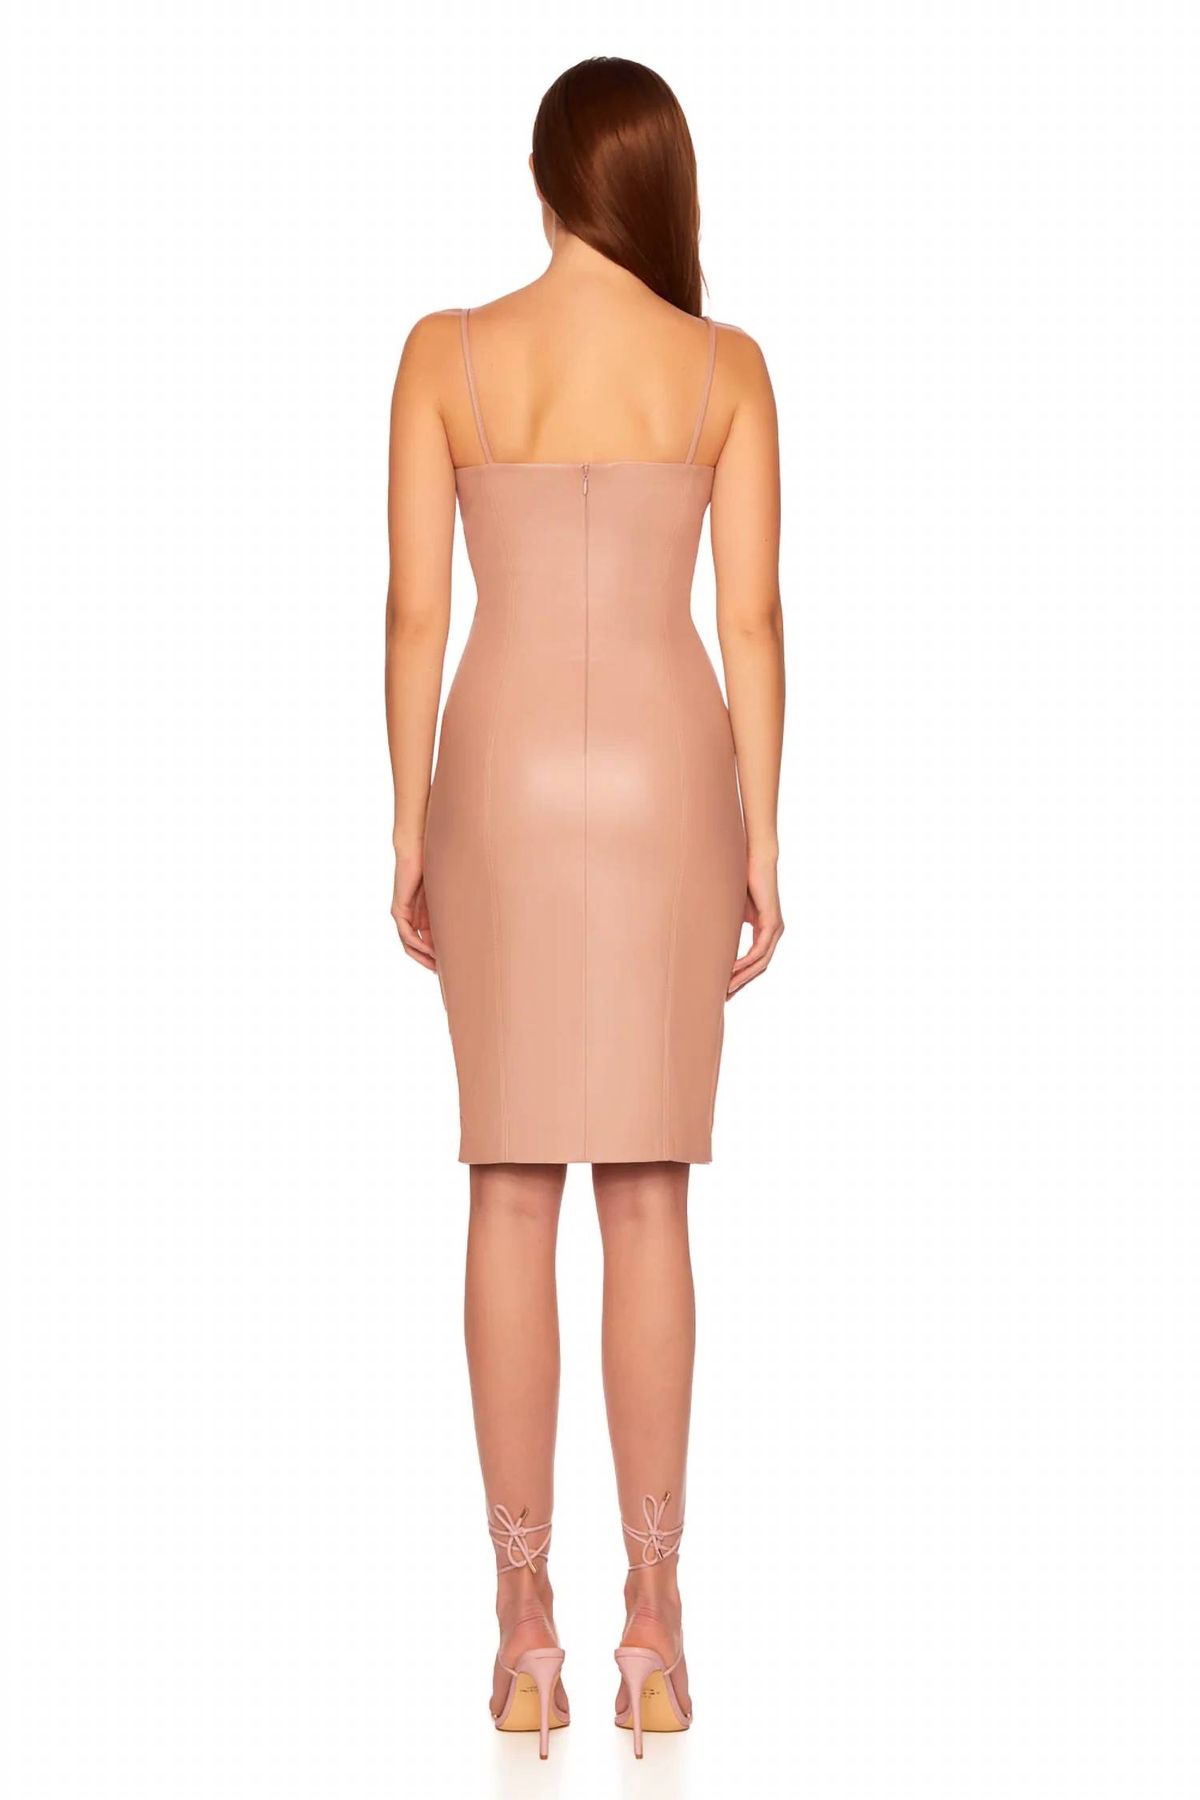 Style 1-2273207092-2901 Susana Monaco Size M Nude Cocktail Dress on Queenly